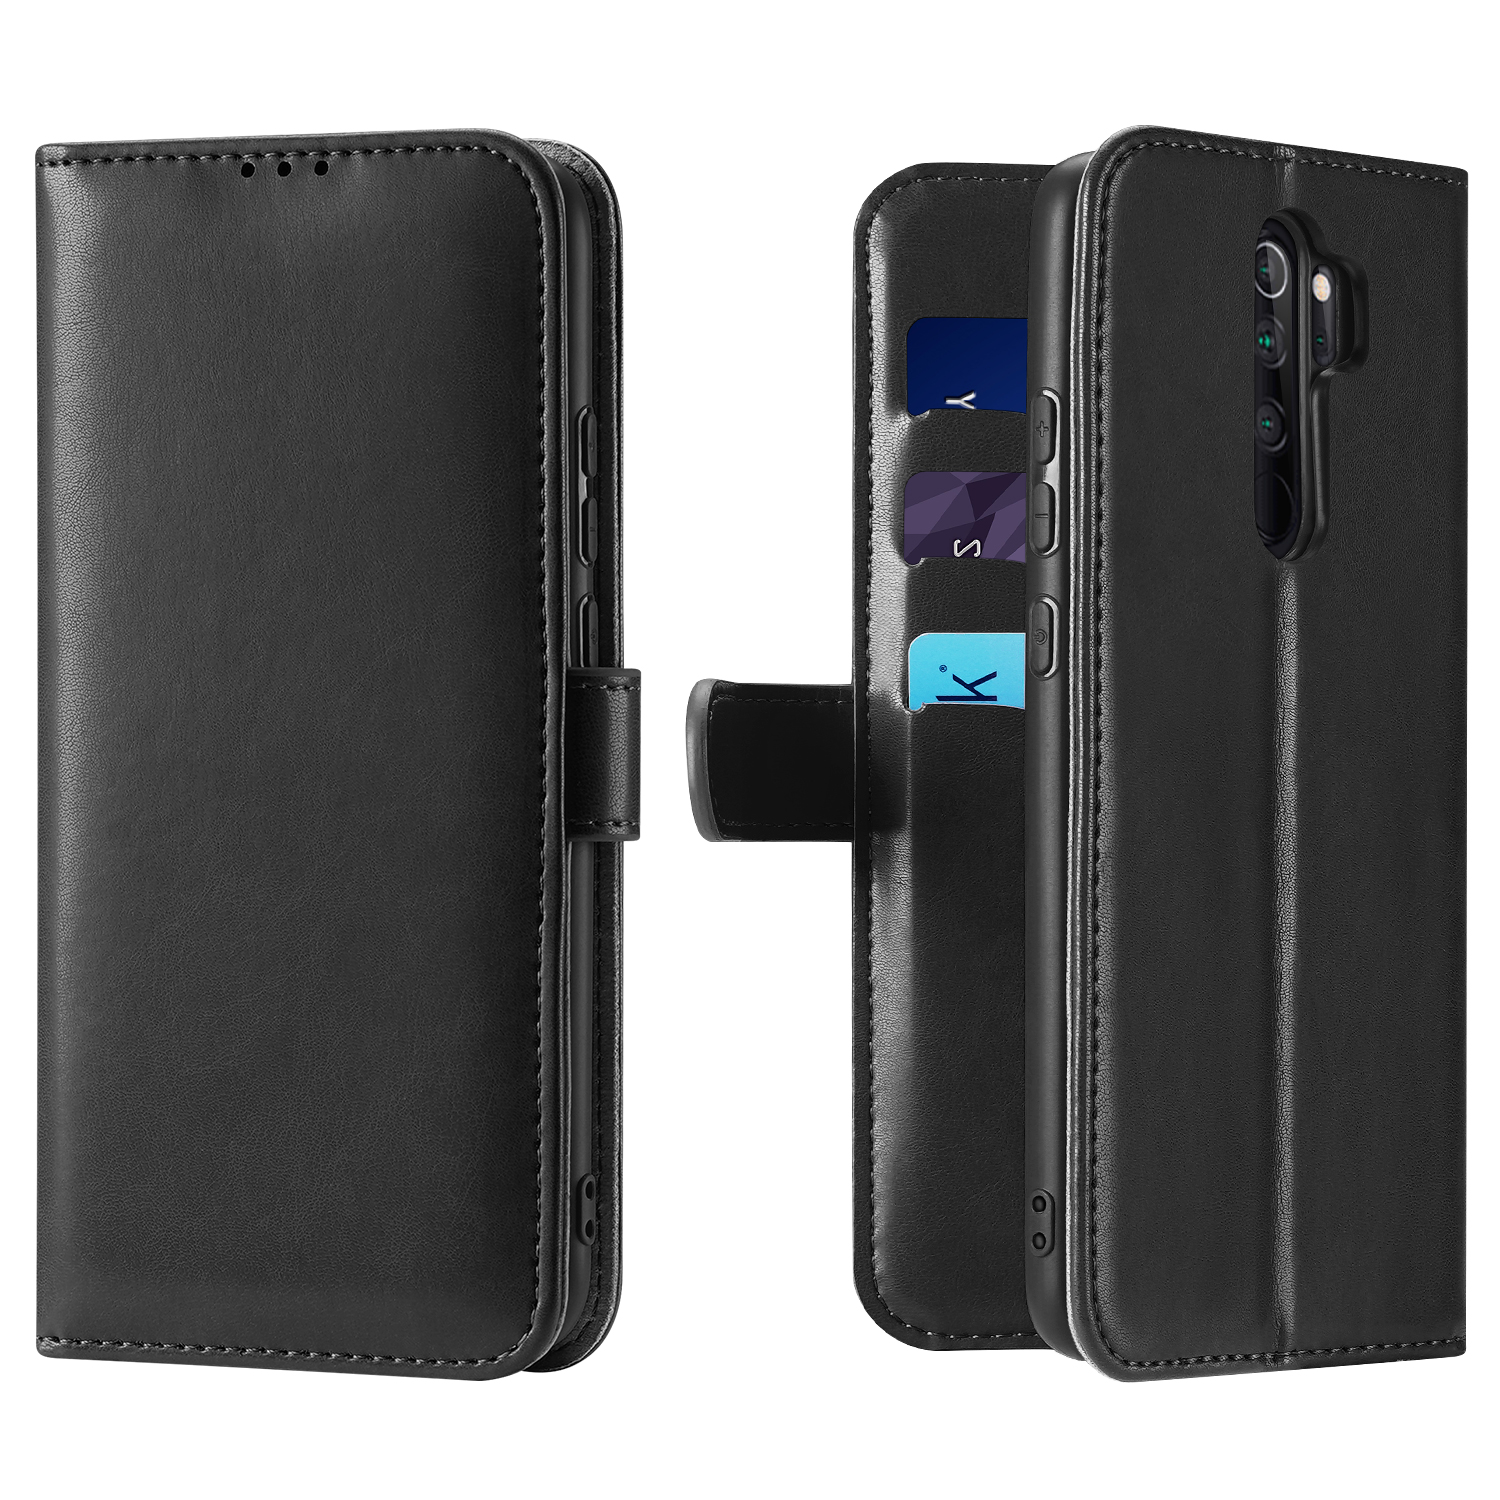 

DUX DUCIS KADO Xiaomi Redmi Note 8 Pro Flip Cover Multi-card slot With Stand Shockproof Full Body Protective Case Non-or